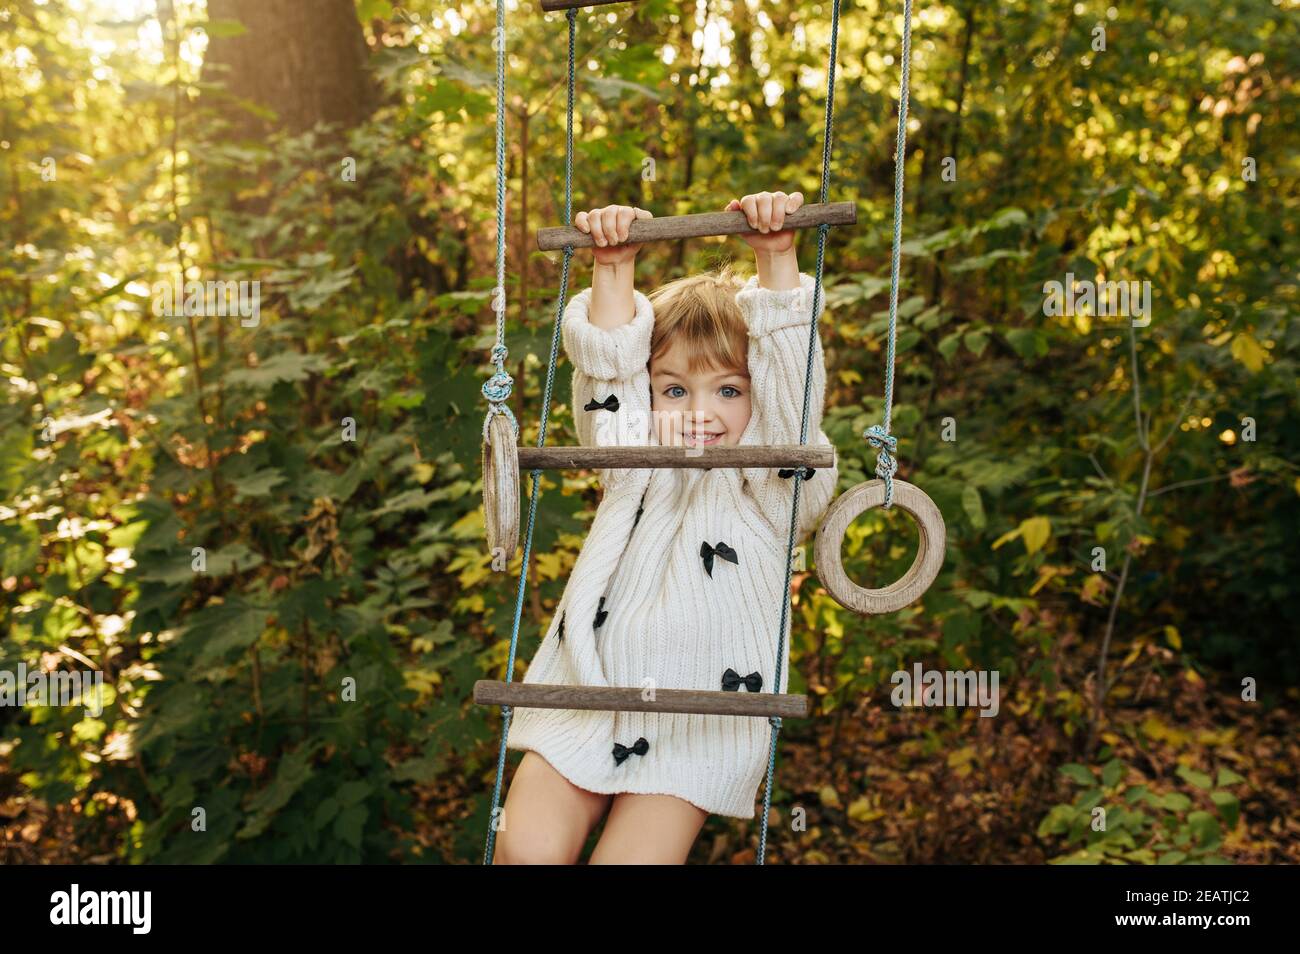 Little girl climbs by rope ladder in the garden Stock Photo